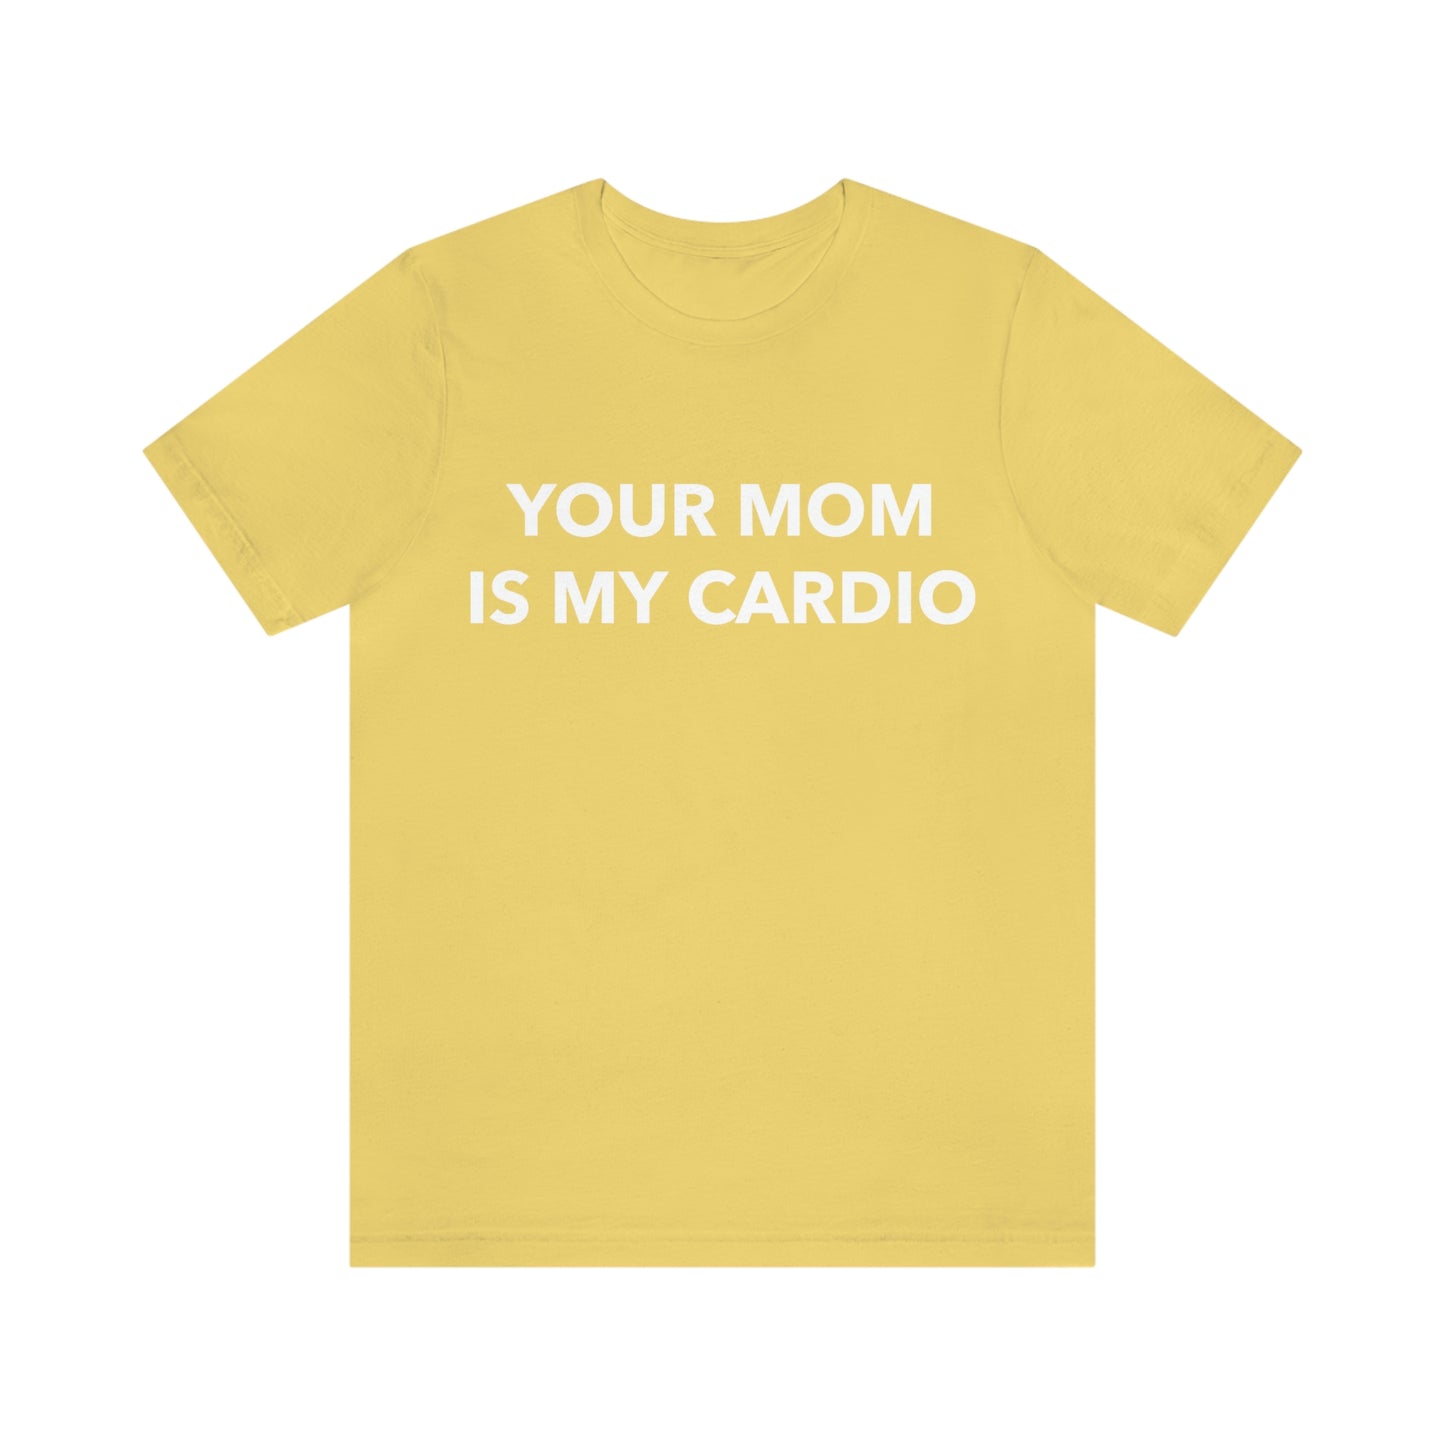 Your Mom Is My Cardio - Unisex T-Shirt